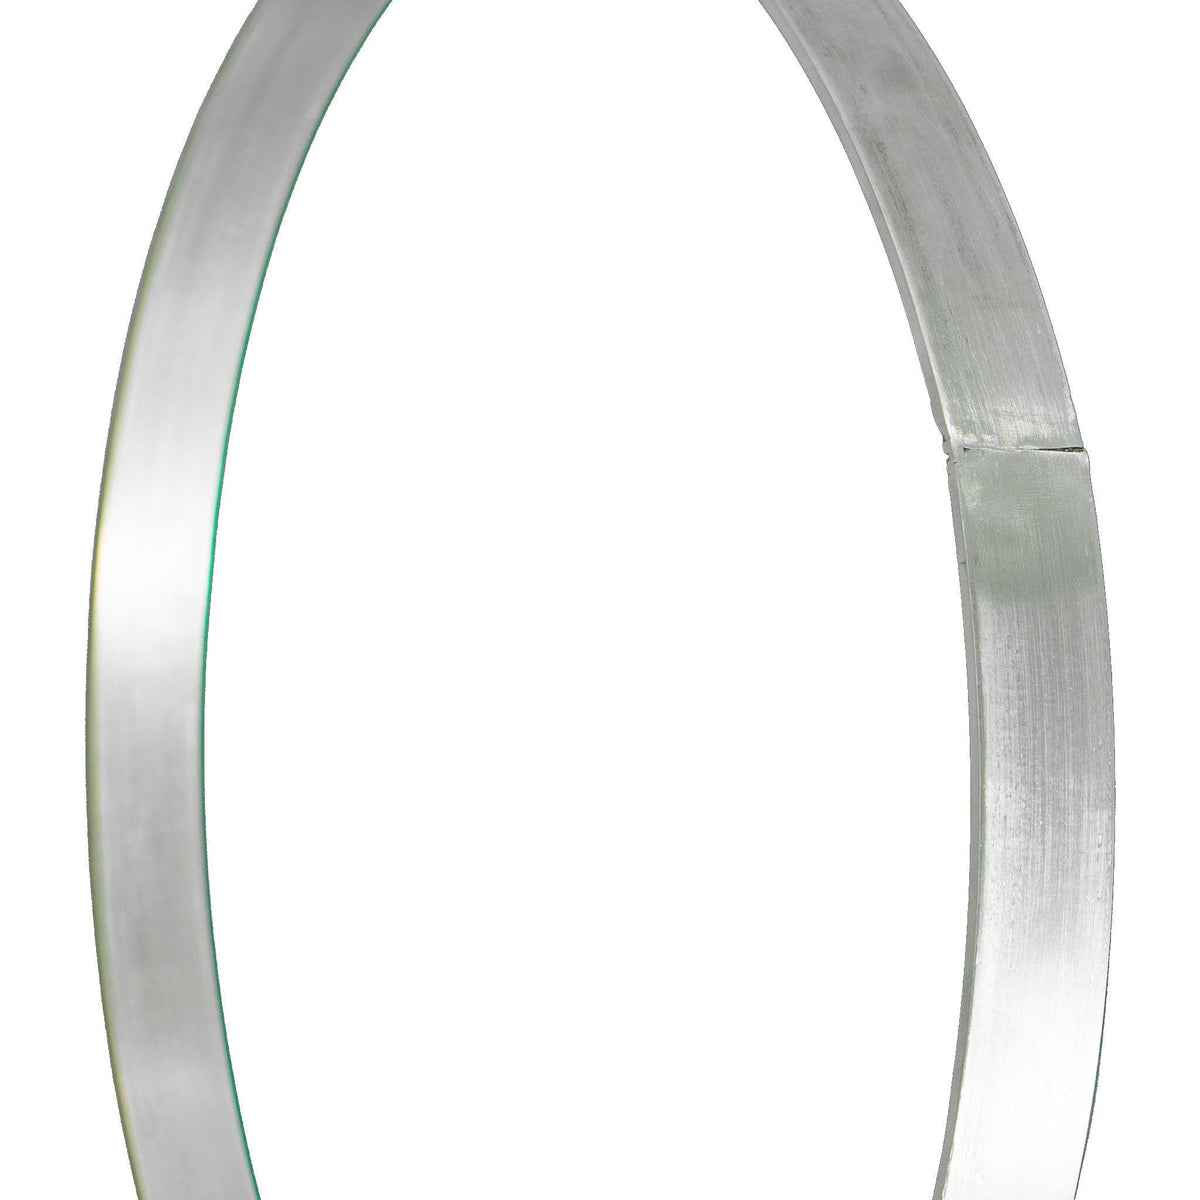 Close up photo of Lee Display's Aluminum Alloy Ring welded by Lee Display.  Available for sale at leedisplay.com